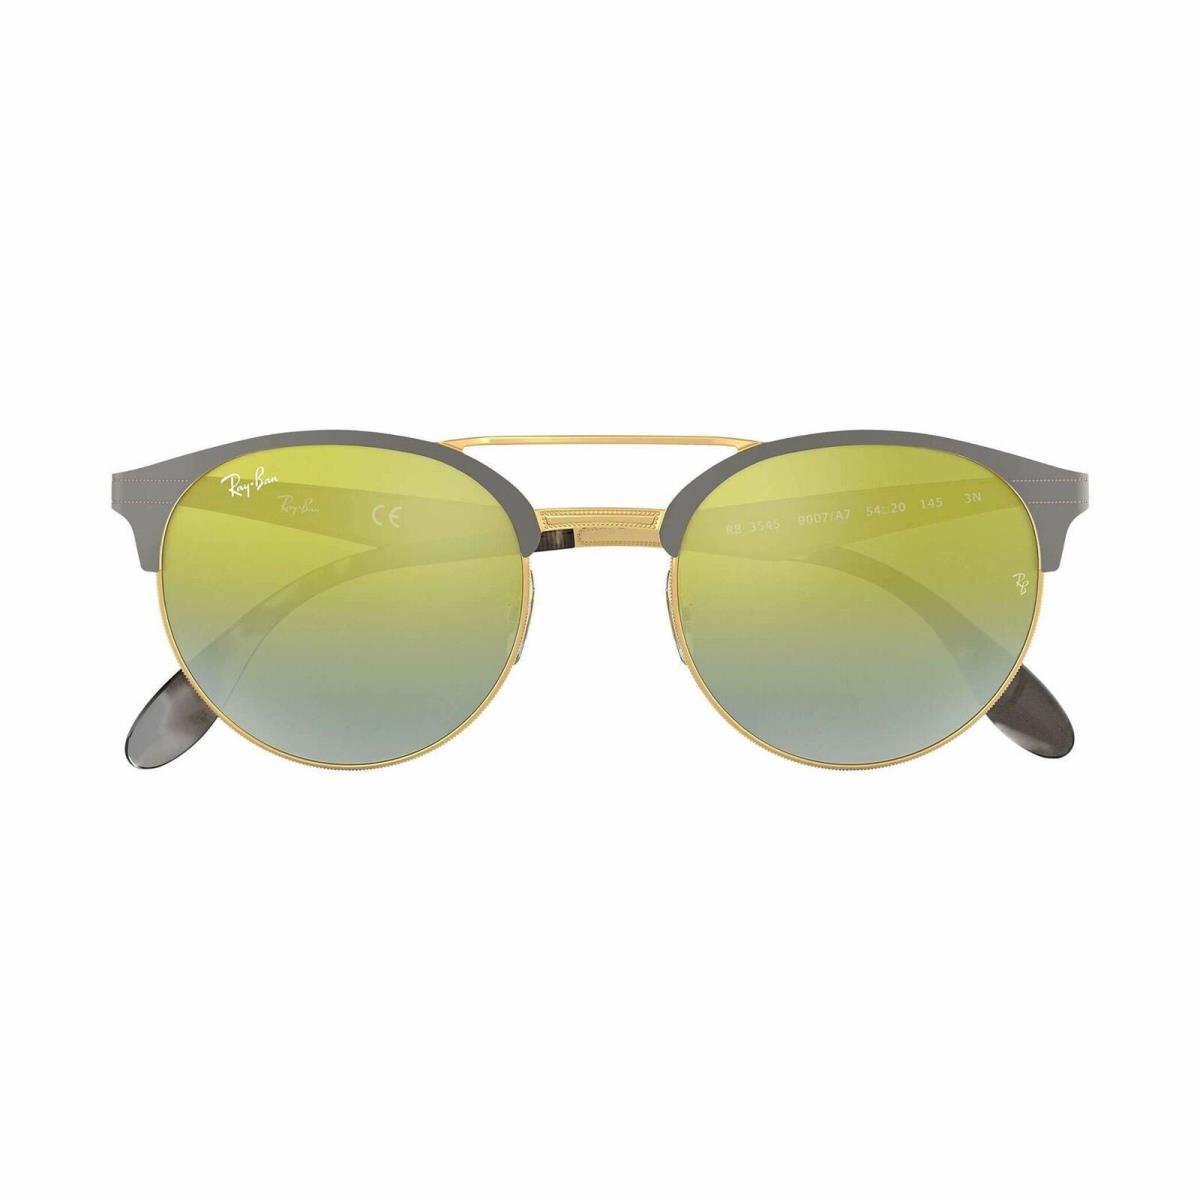 RB3545-9007/A7 Ray-ban Highstreet Round Sunglasses